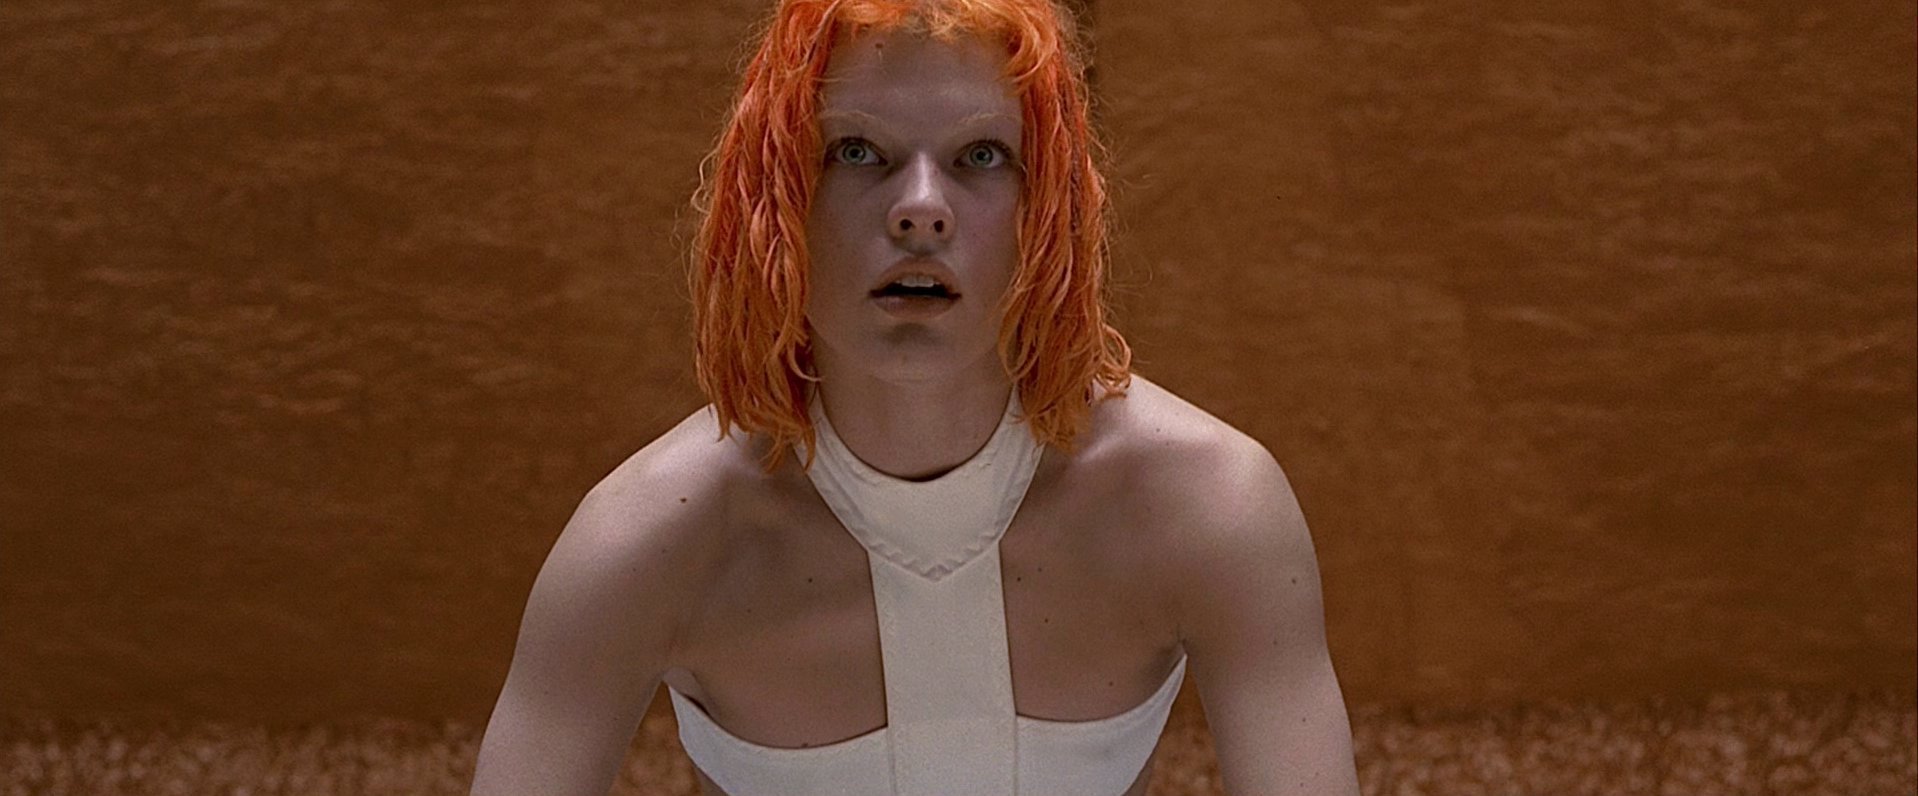 Fifth Element fifthelementRSE Twitter